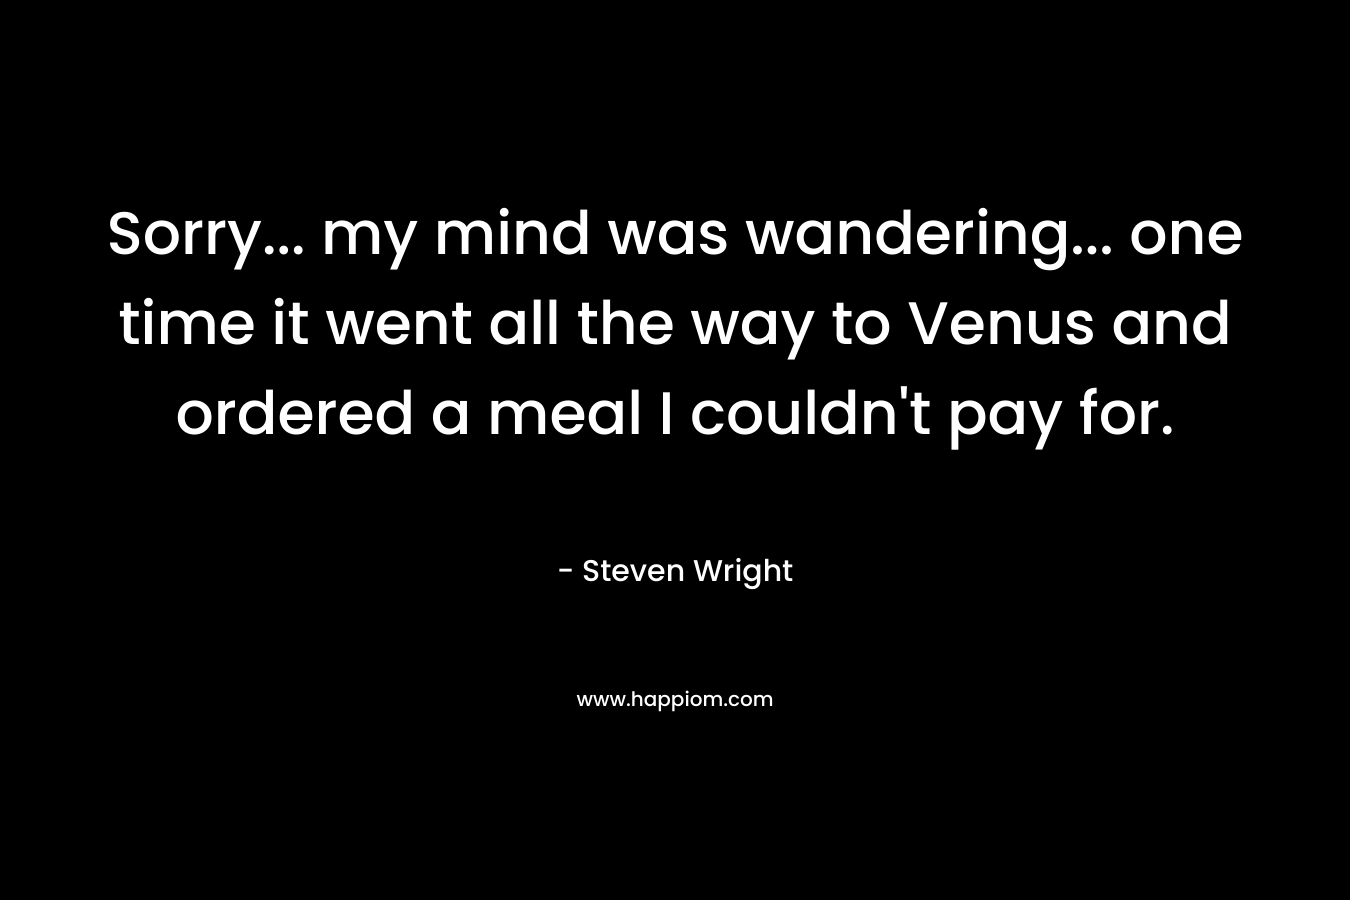 Sorry... my mind was wandering... one time it went all the way to Venus and ordered a meal I couldn't pay for.